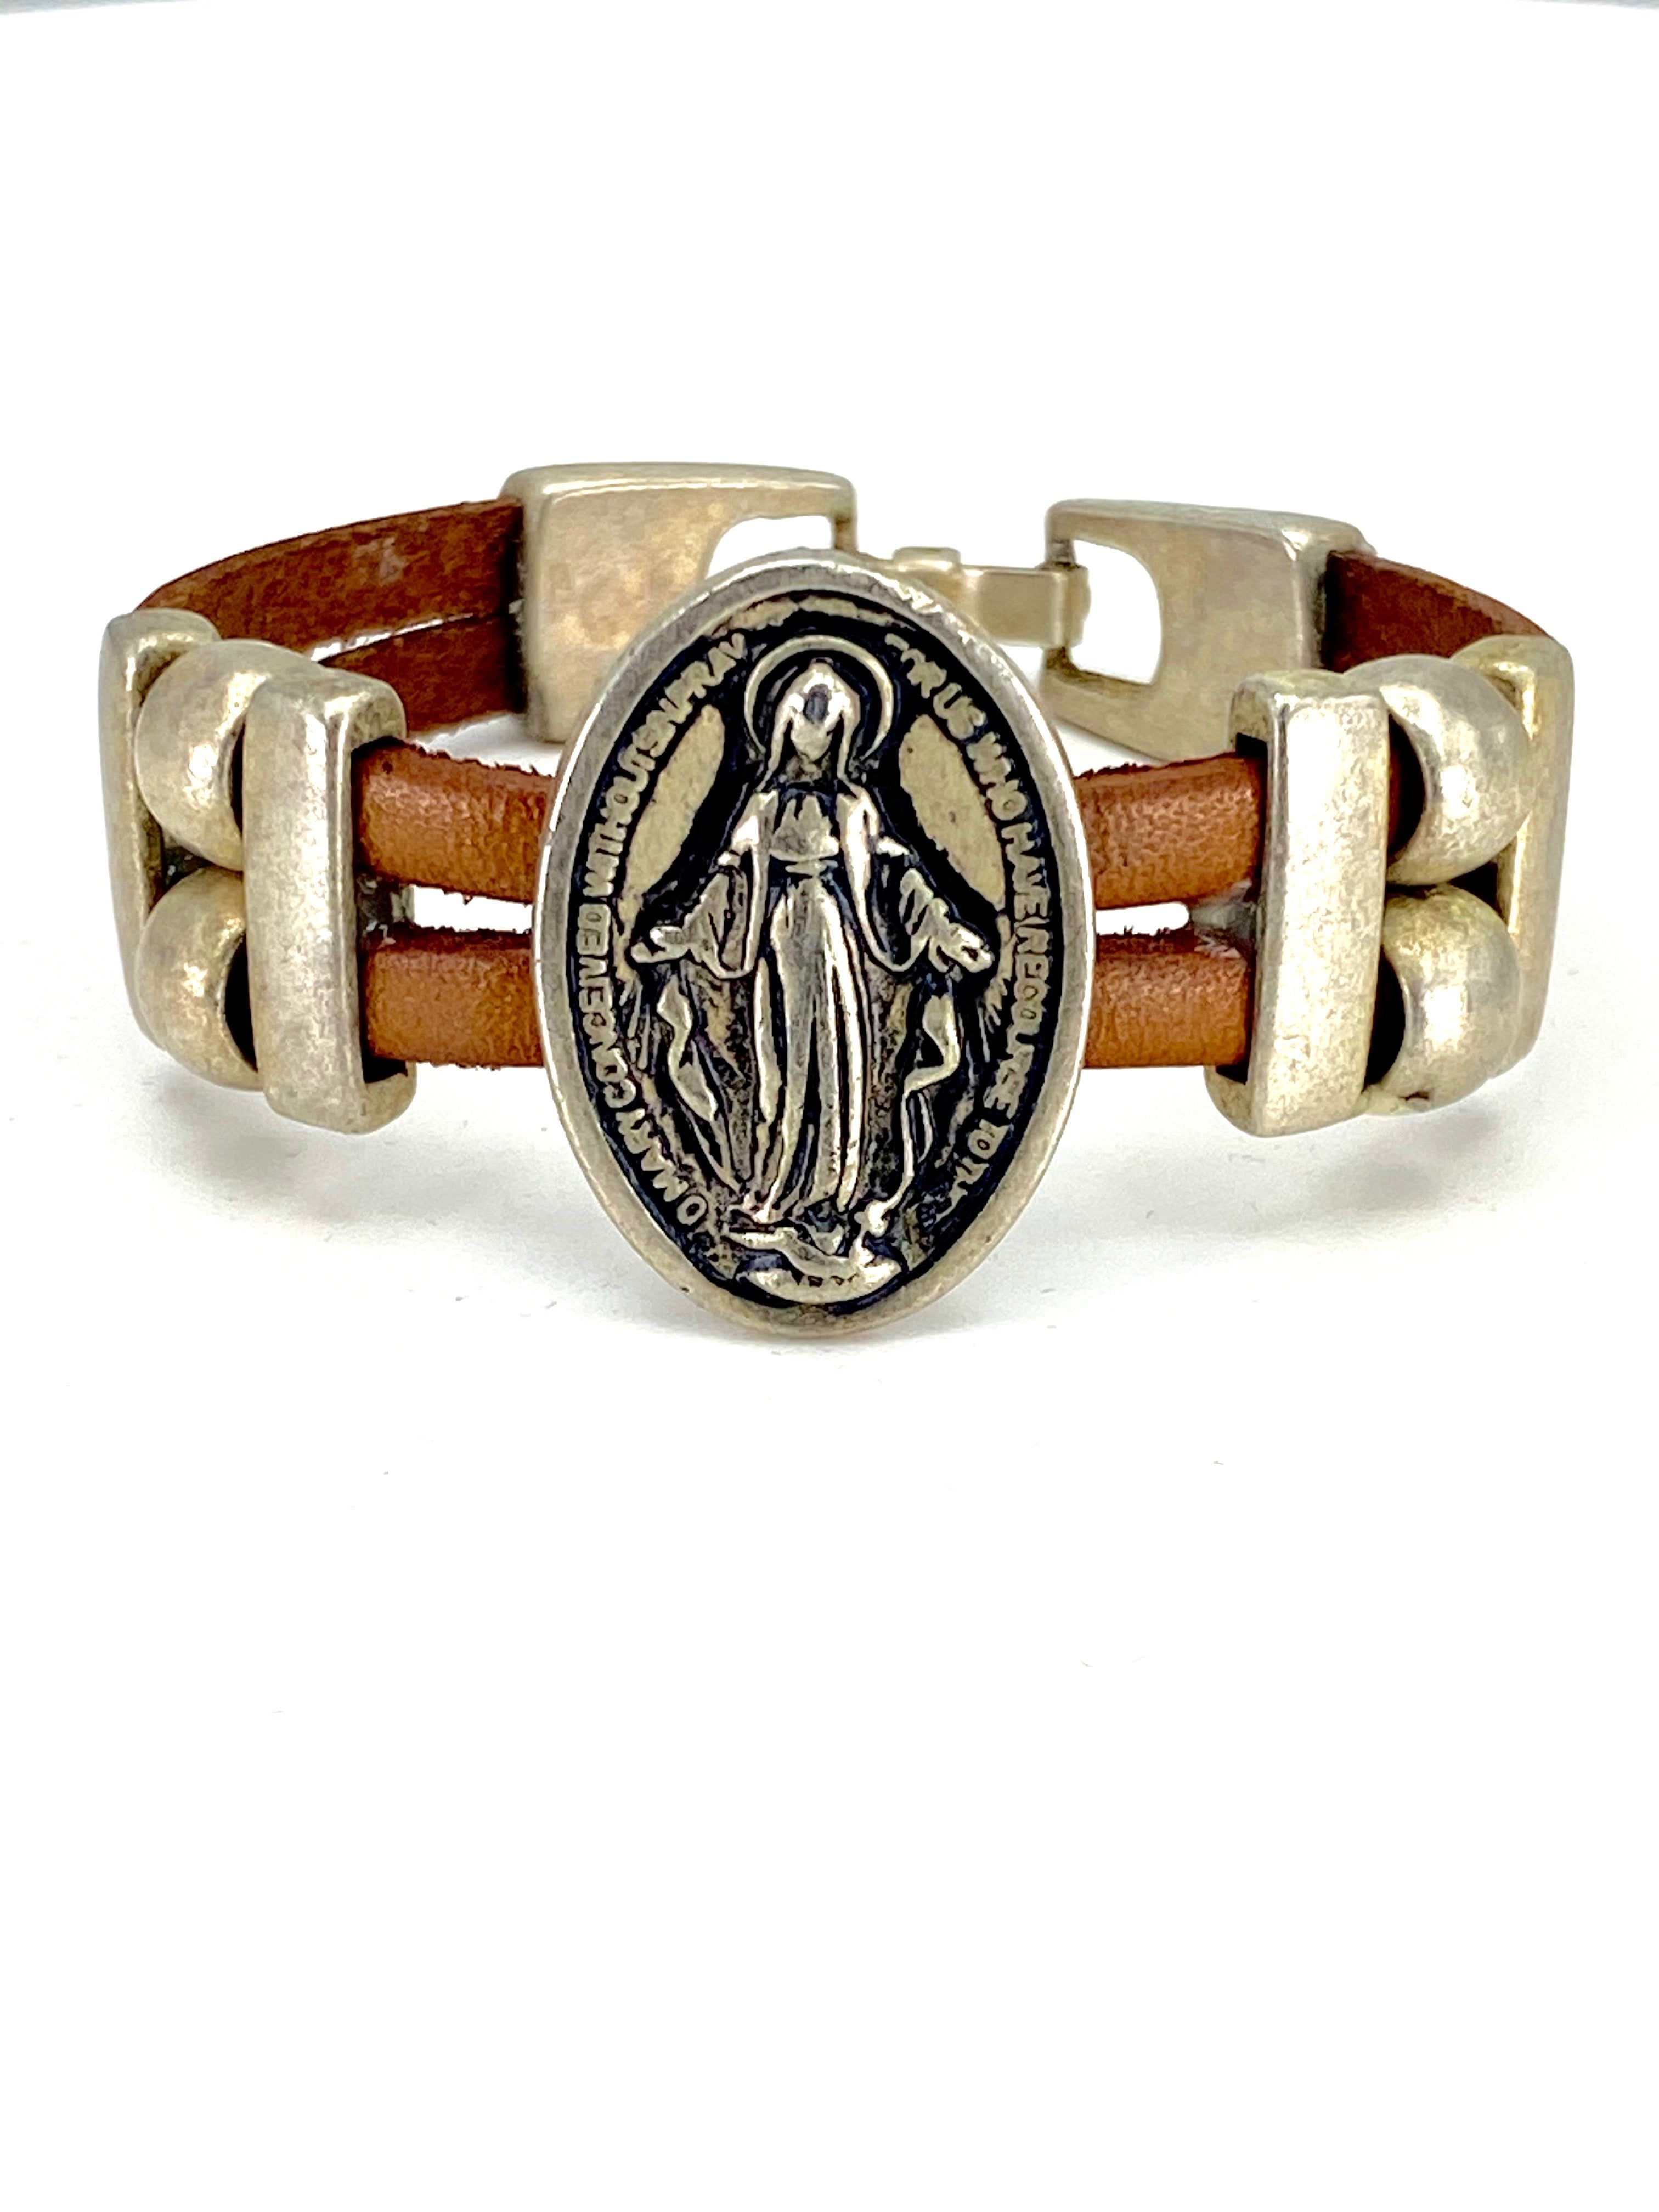 Vintage Miraculous Virgen Mary bracelet handmade jewelry by Graciela's Collection